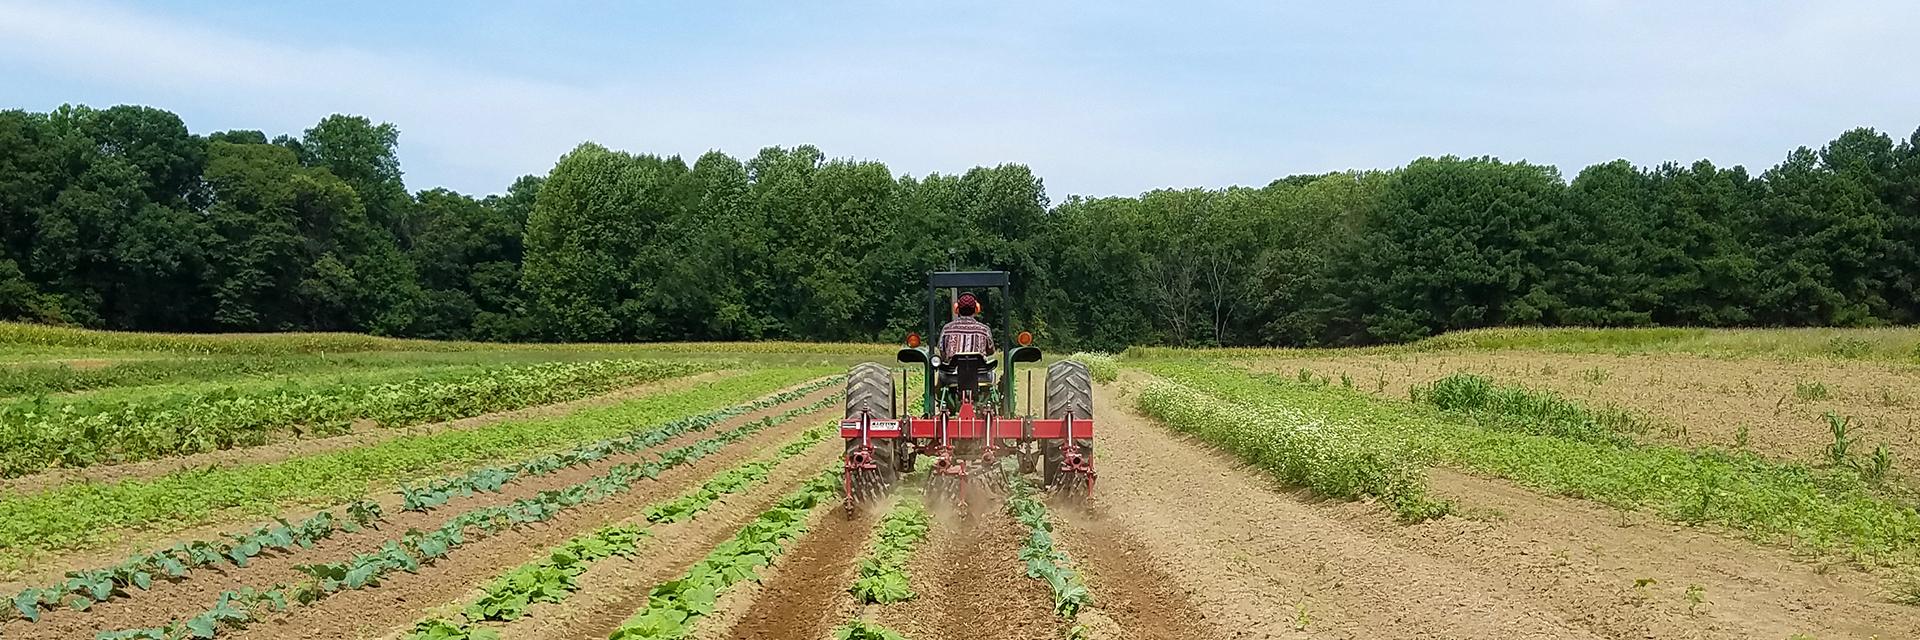 For the Maryland Community | Terp Farm